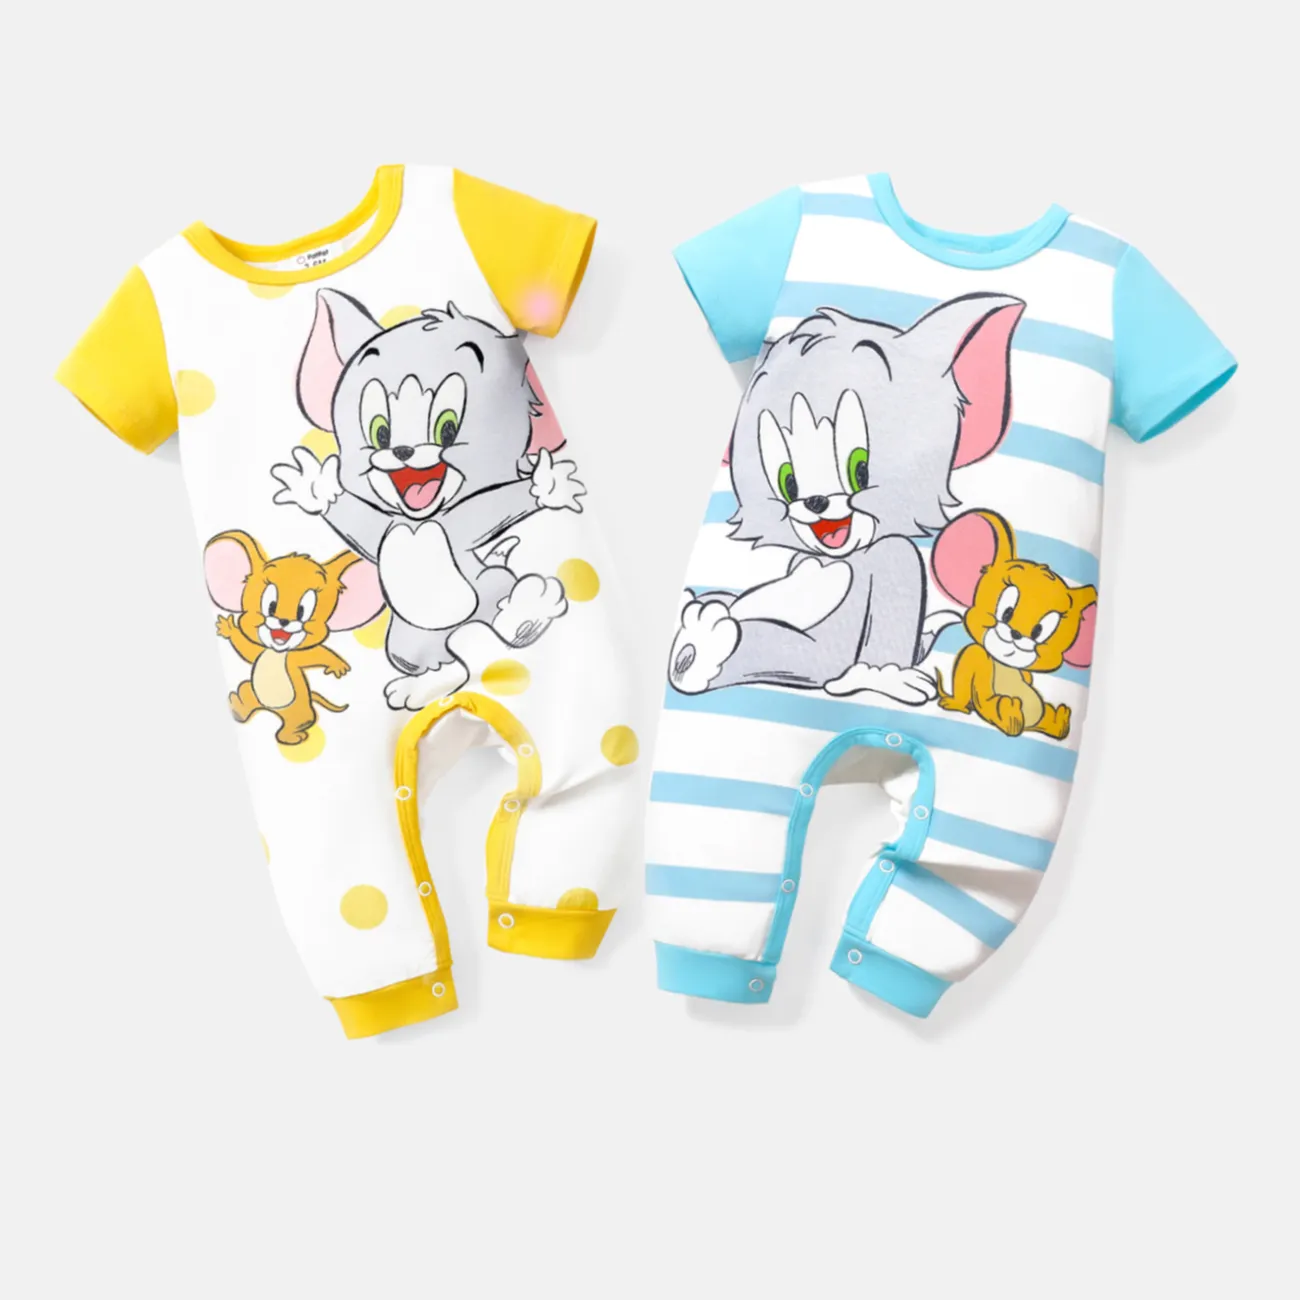 Tom and Jerry Baby Boy Short-sleeve Graphic Print Polka Dots or Striped Naia™ Jumpsuit Blue big image 1